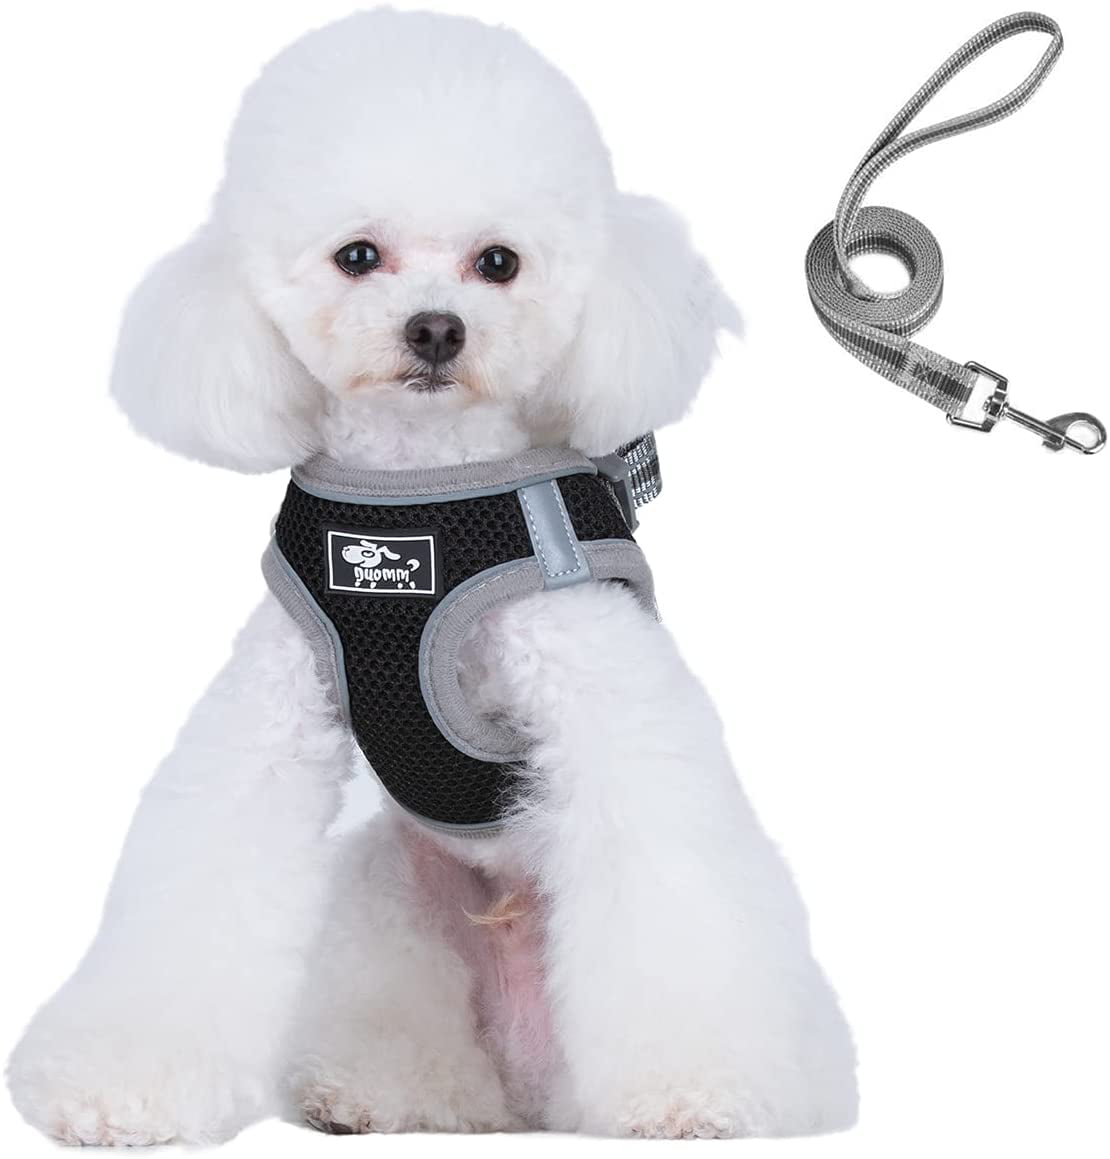 S,M,L Dog and Cat Universal Harness,Durable D-Ring Kitten Harness with Reflective Strap Soft Dog Vest Harness No Pull Cat Harness and Leash Set Step in Puppy Harness for Small Dogs 